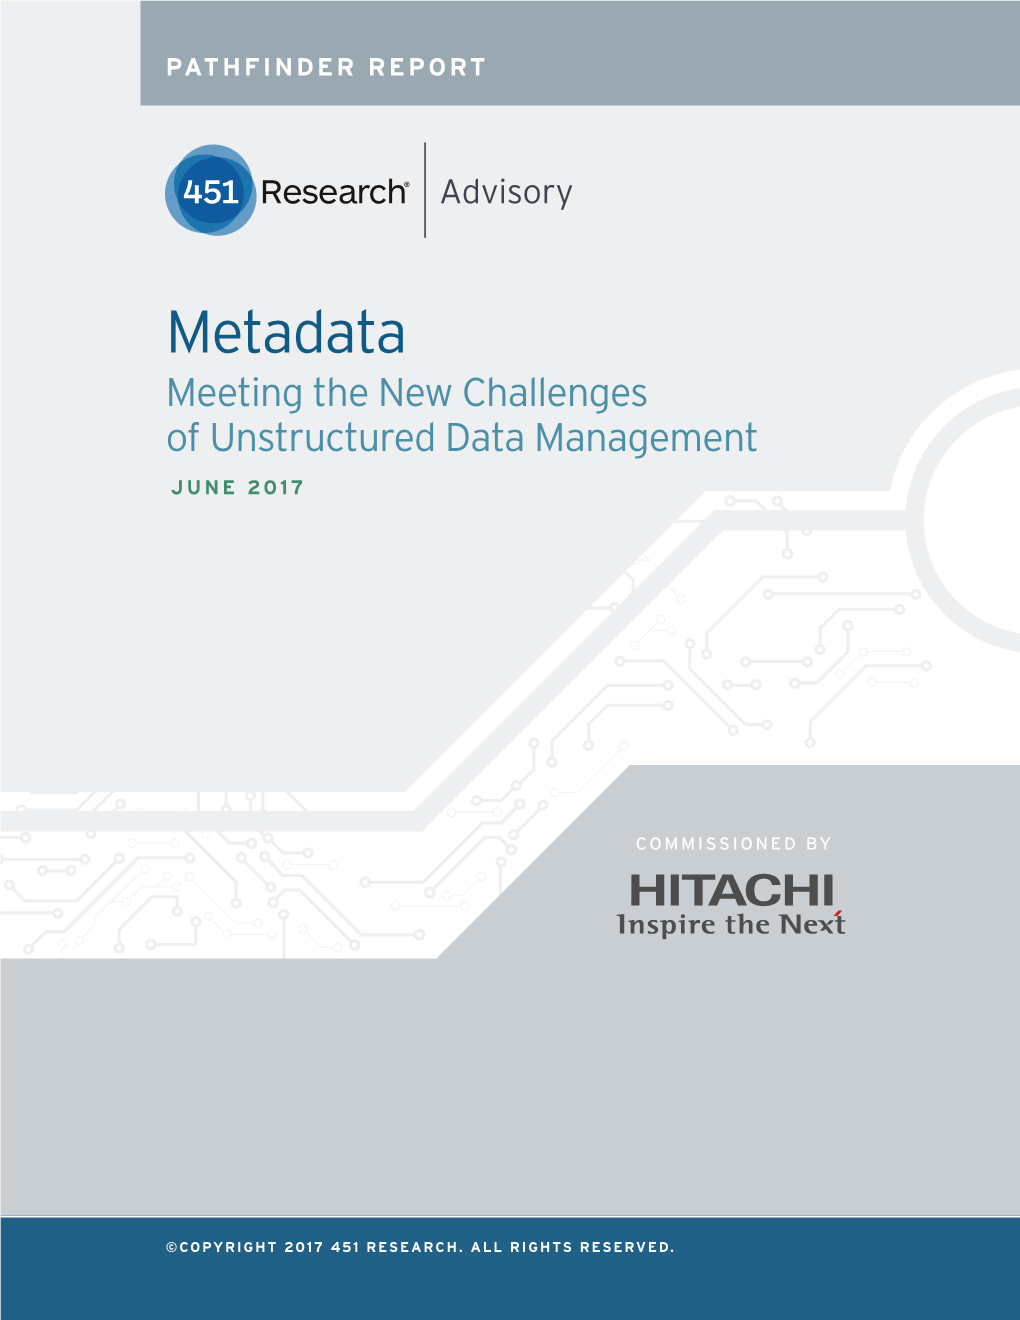 Metadata Meeting the New Challenges of Unstructured Data Management JUNE 2017